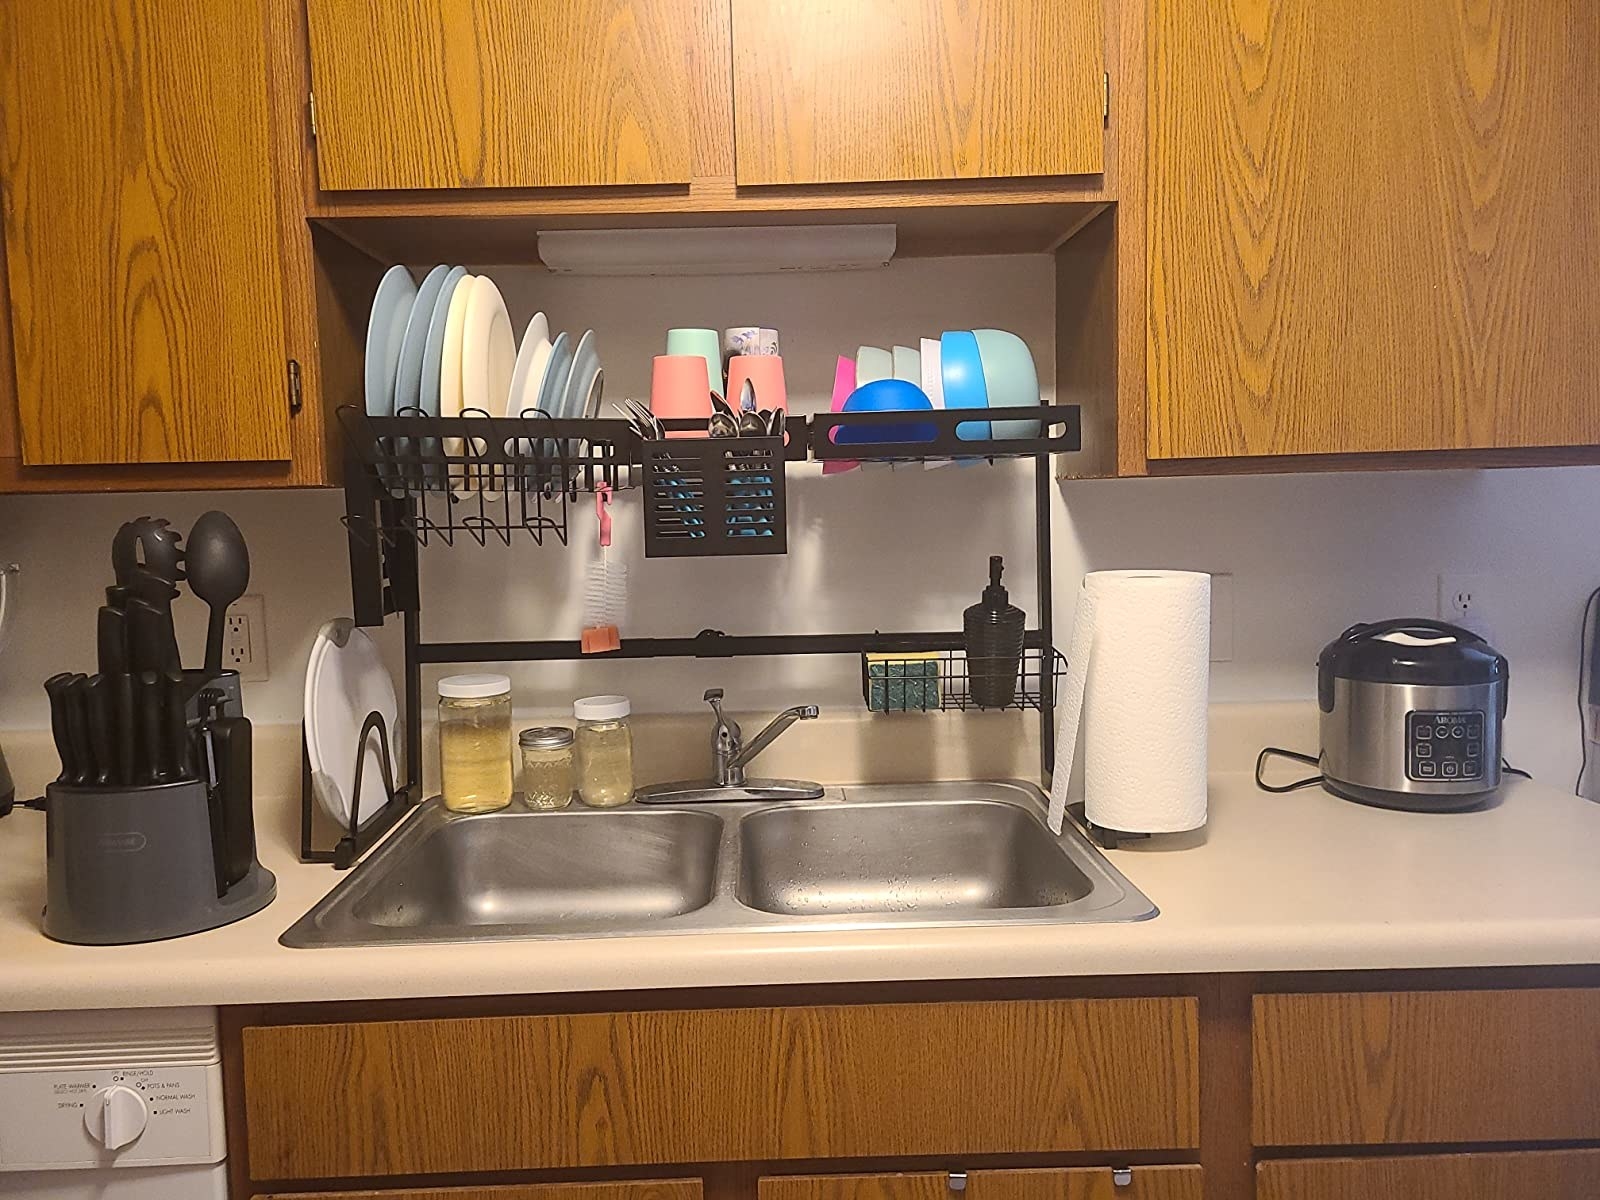 A reviewer image of the drying rack set up over a sink